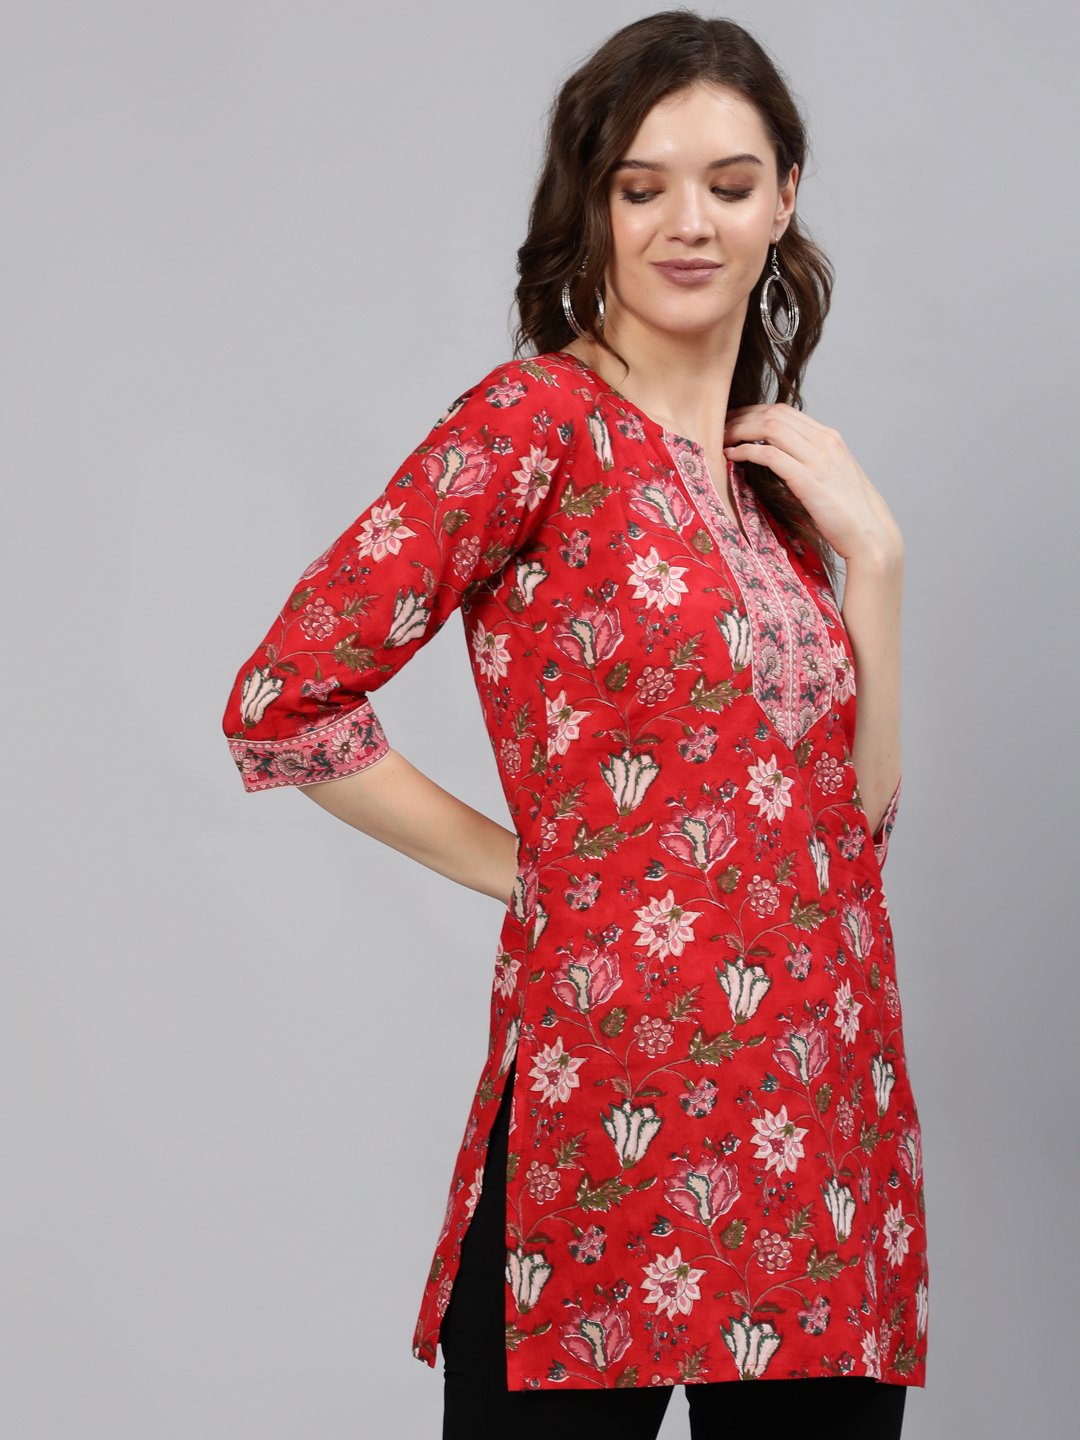 Women's Red Floral Printed Tunic With Three Quarter Sleeves - NOZ2TOZ USA